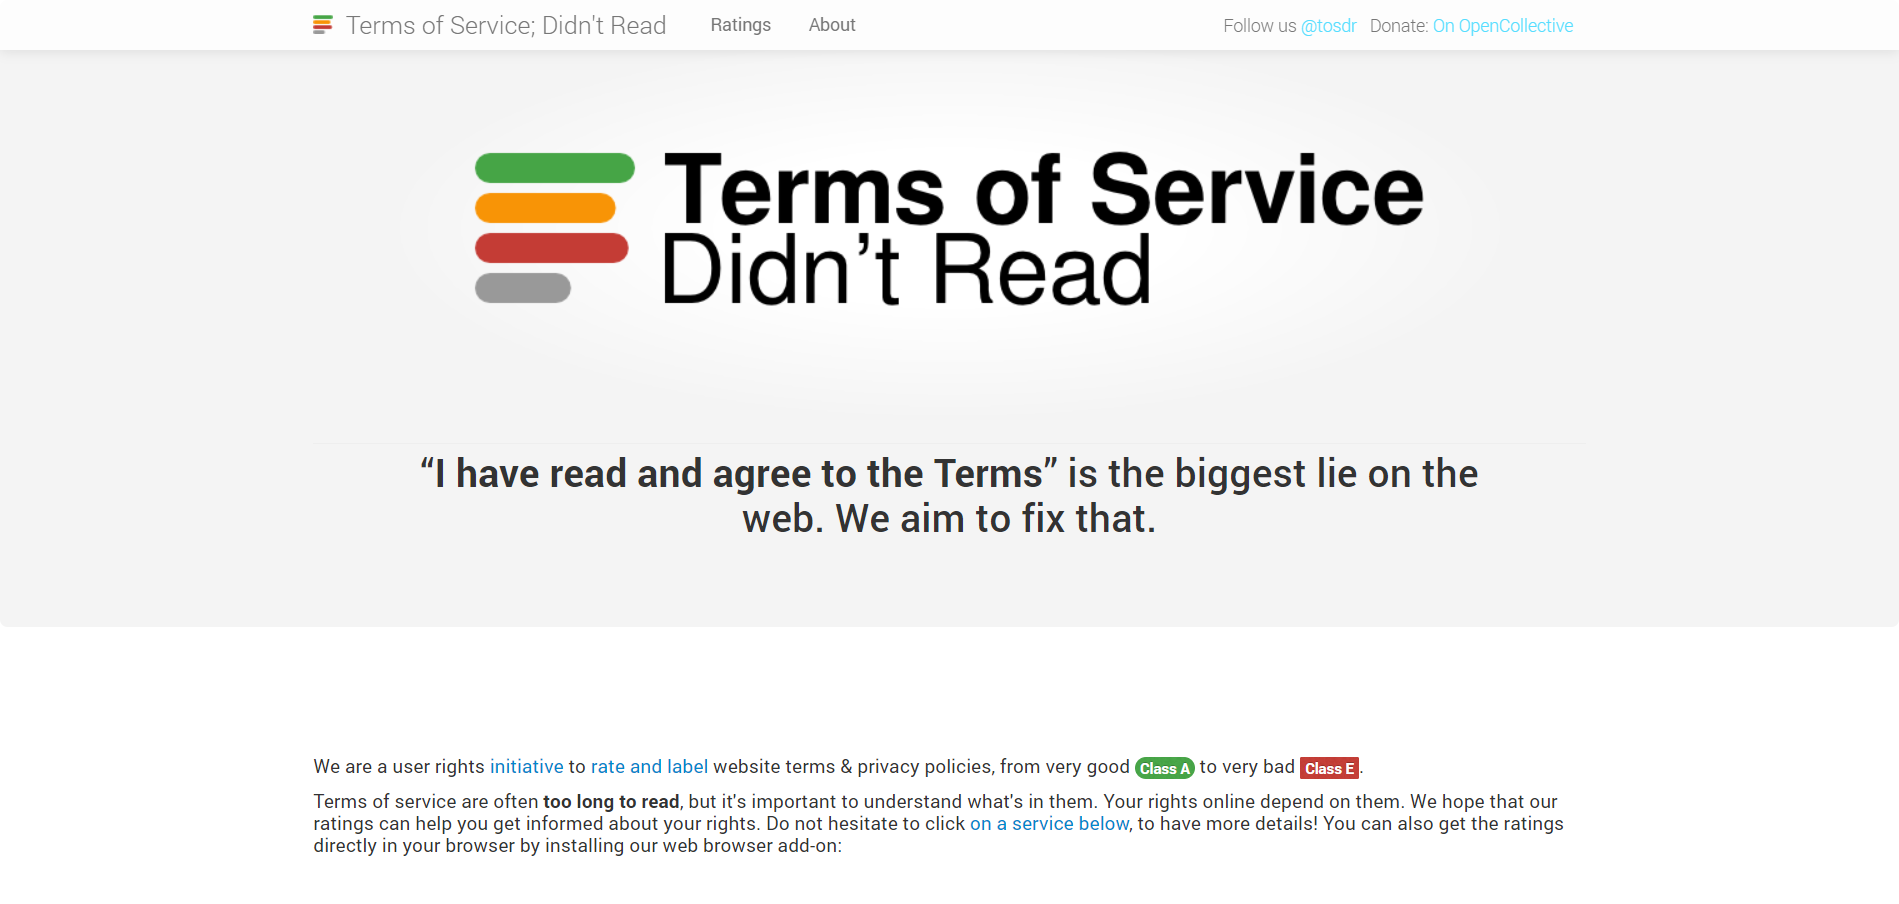 A screenshot of the Terms of Service; Didn't Read website